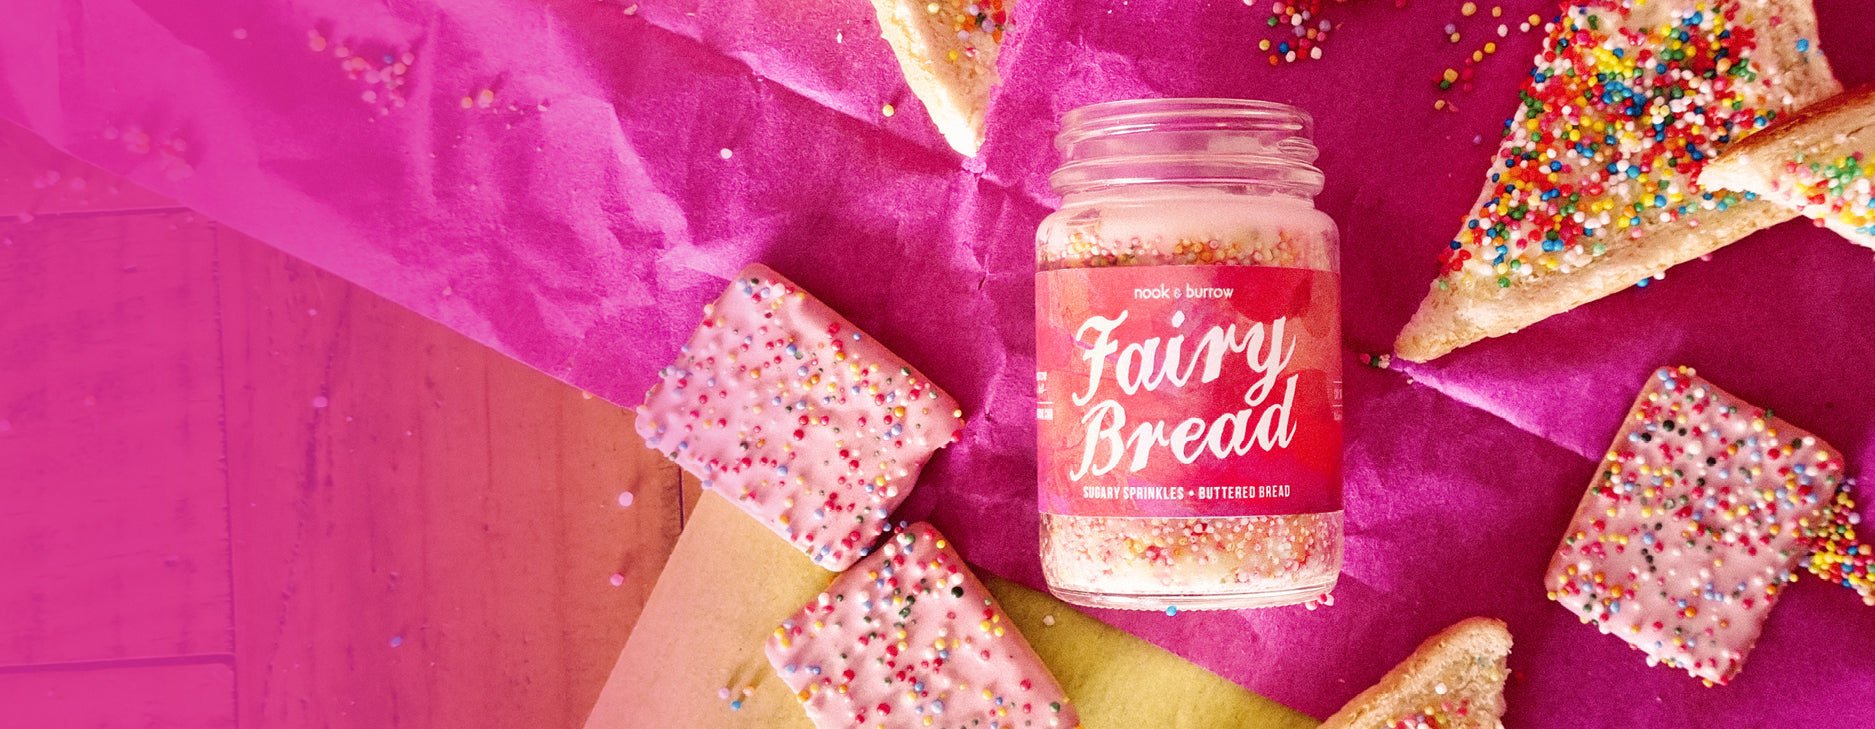 Fairy Bread Candle banner with pink background and sprinkles on buttered bread